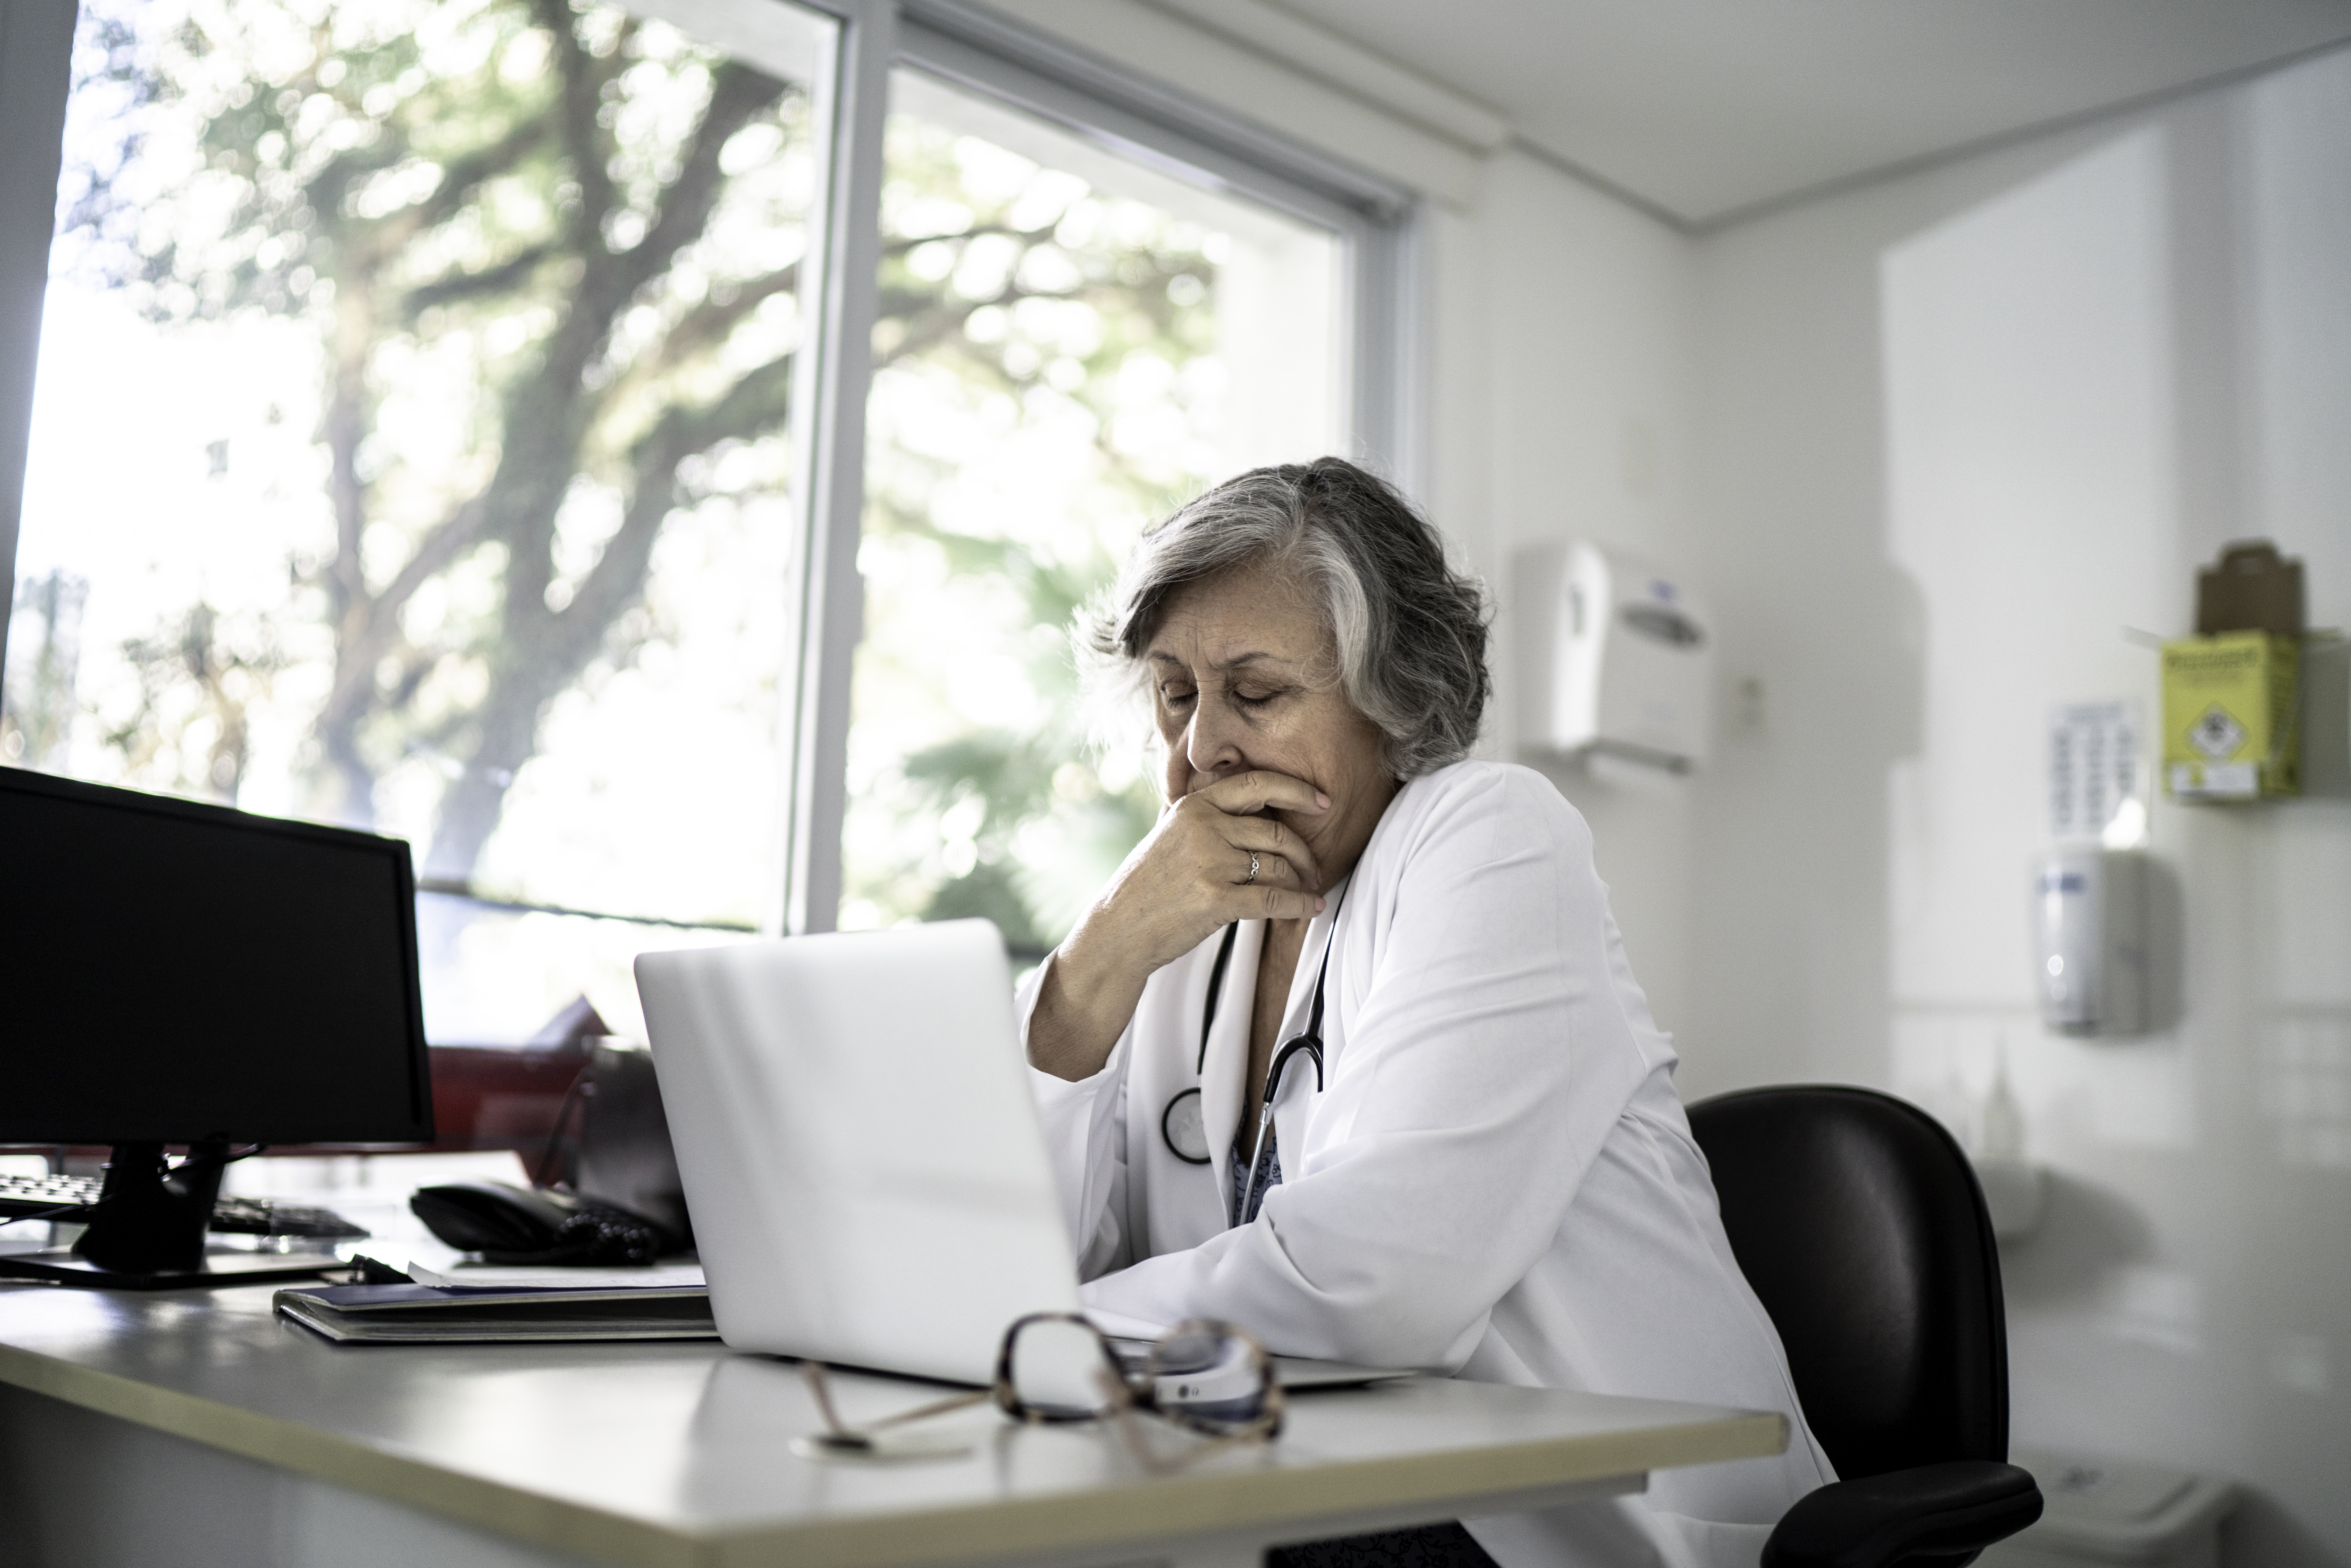 Overwhelmed healthcare worker looks at laptop.